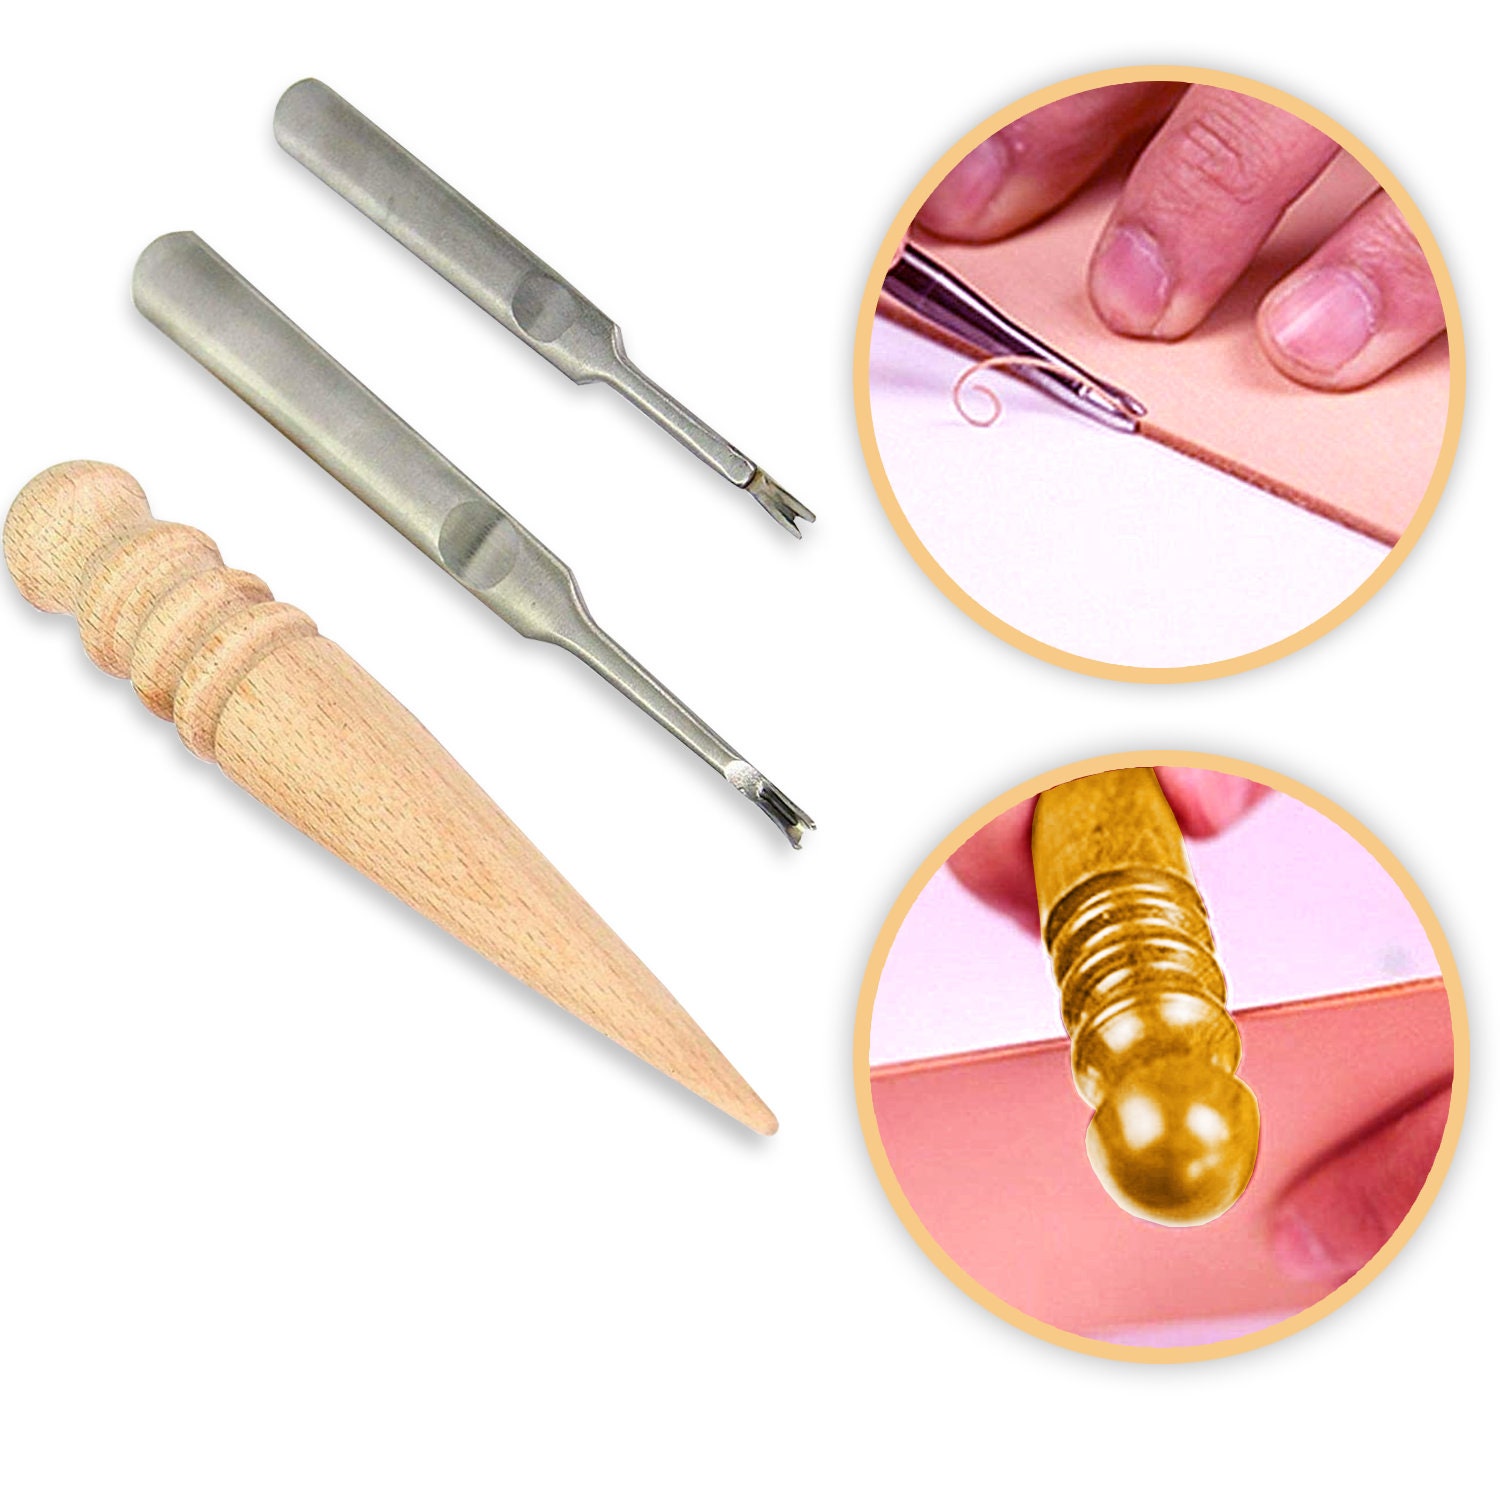 Leather Craft Hand Tools Kit for Hand Sewing Stitching Stamping Saddle DIY Making  Leather Tools Set Leathercraft Adults Gifts - AliExpress